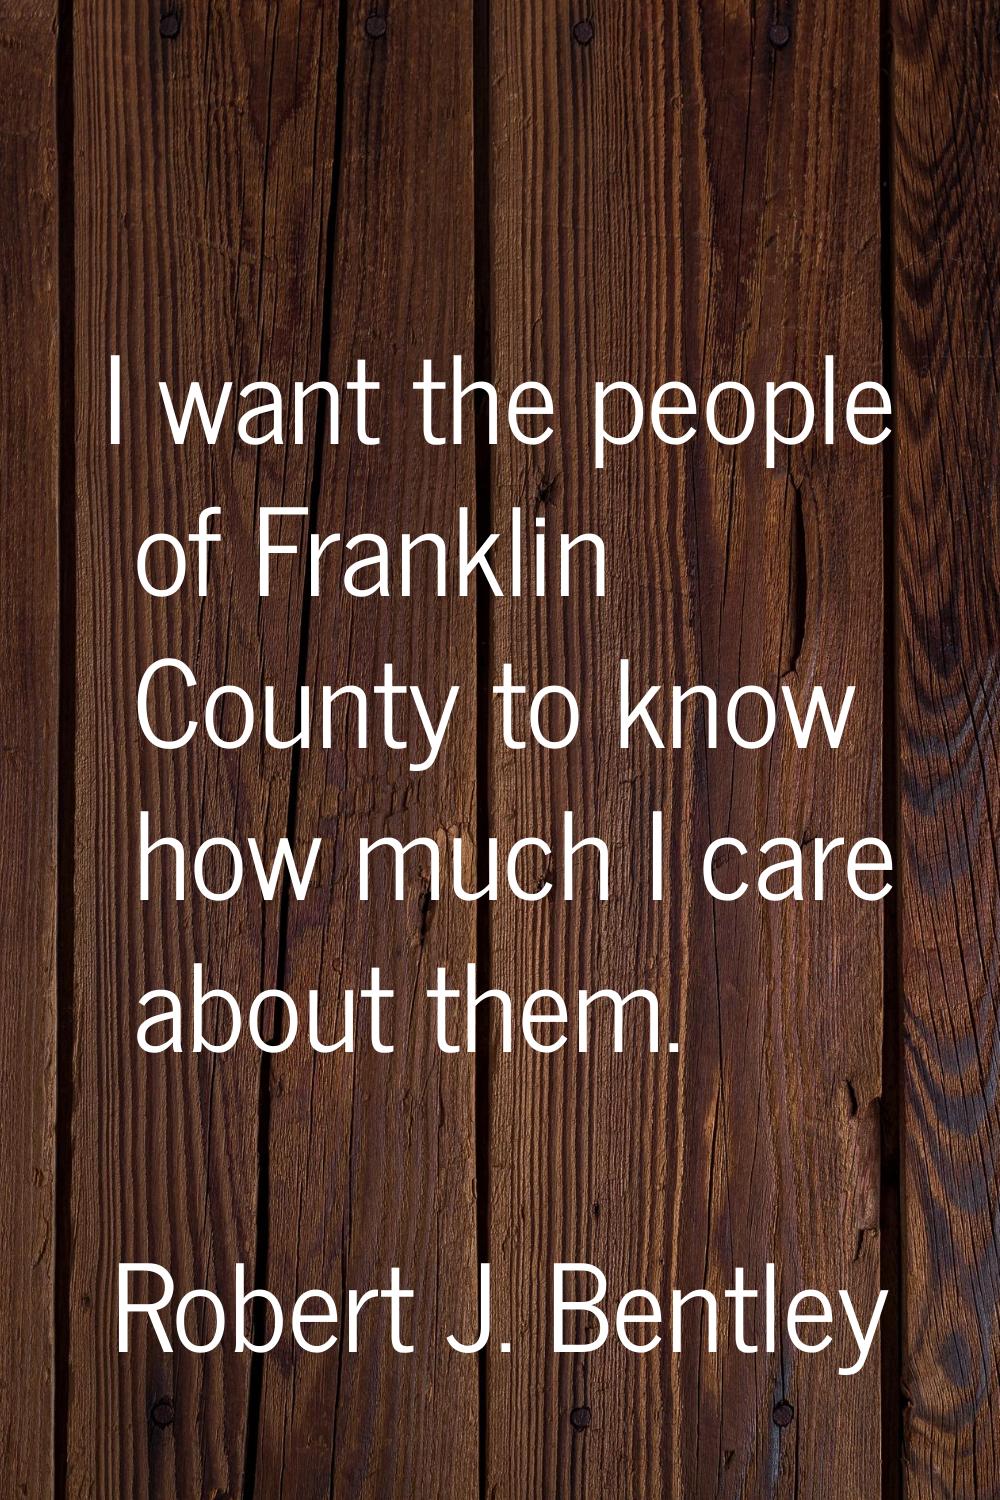 I want the people of Franklin County to know how much I care about them.